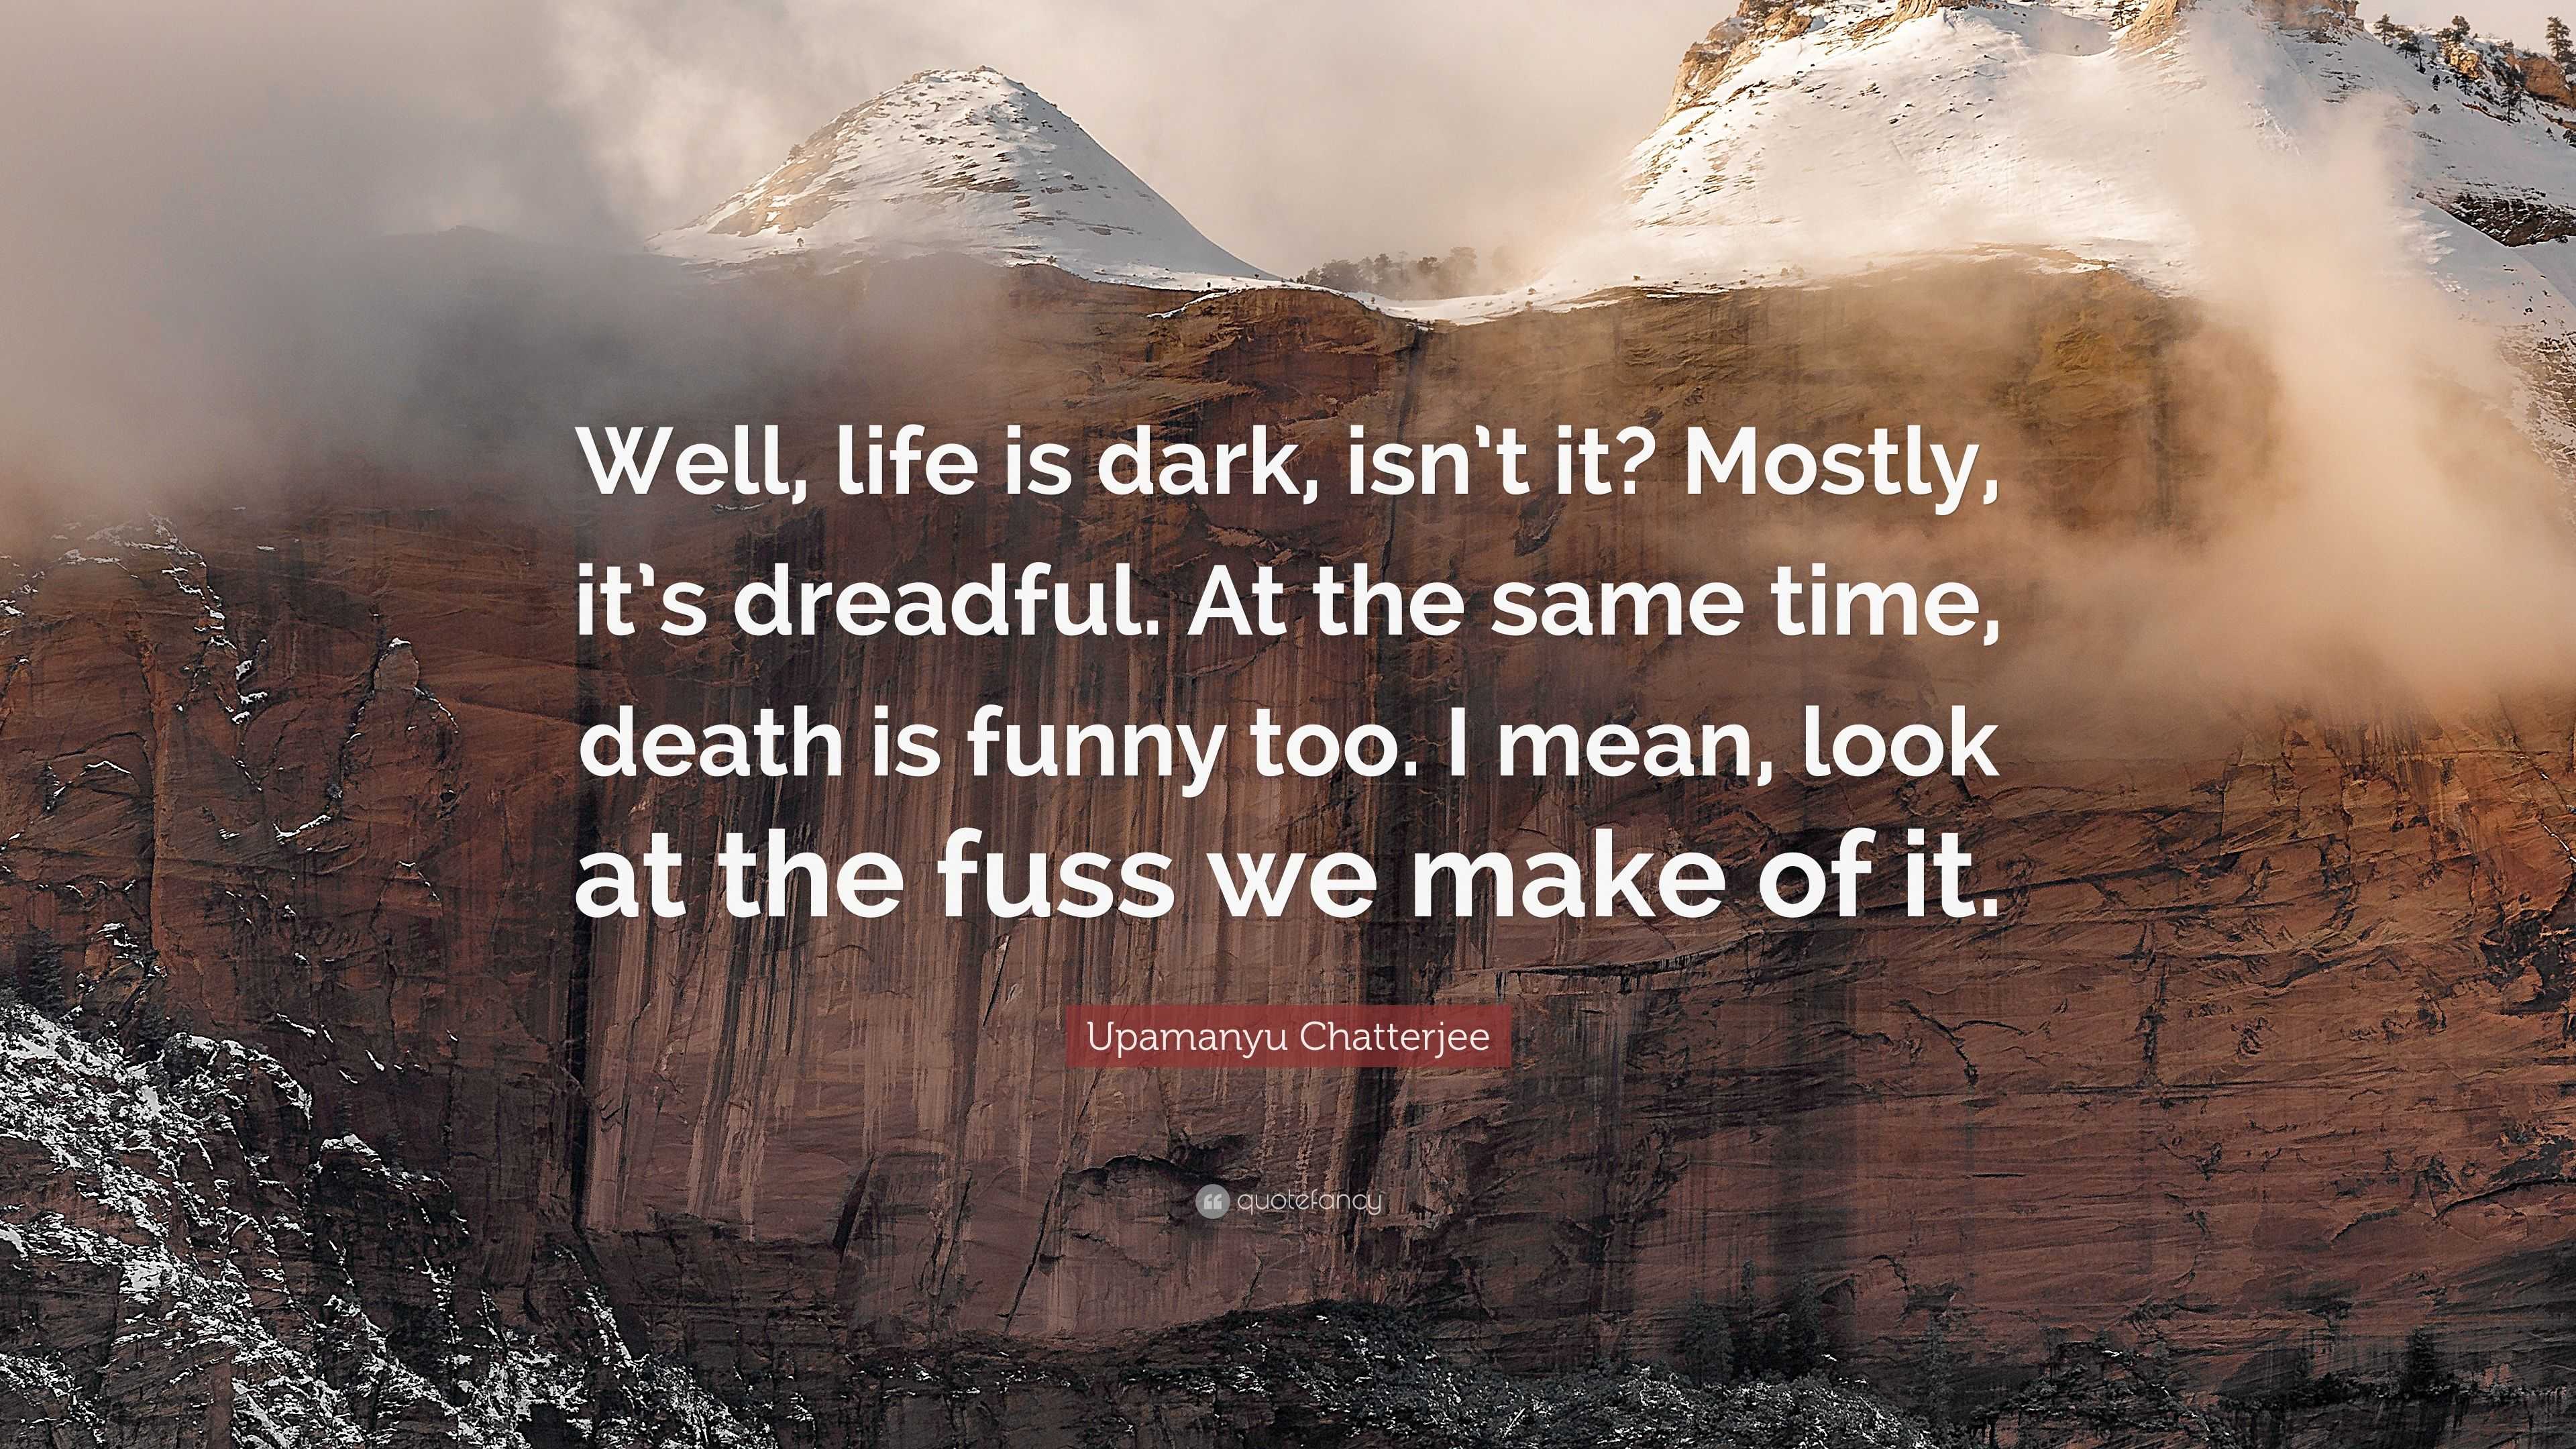 Upamanyu Chatterjee Quote: “Well, life is dark, isn't it? Mostly, it's  dreadful. At the same time, death is funny too. I mean, look at the fuss we  m...”